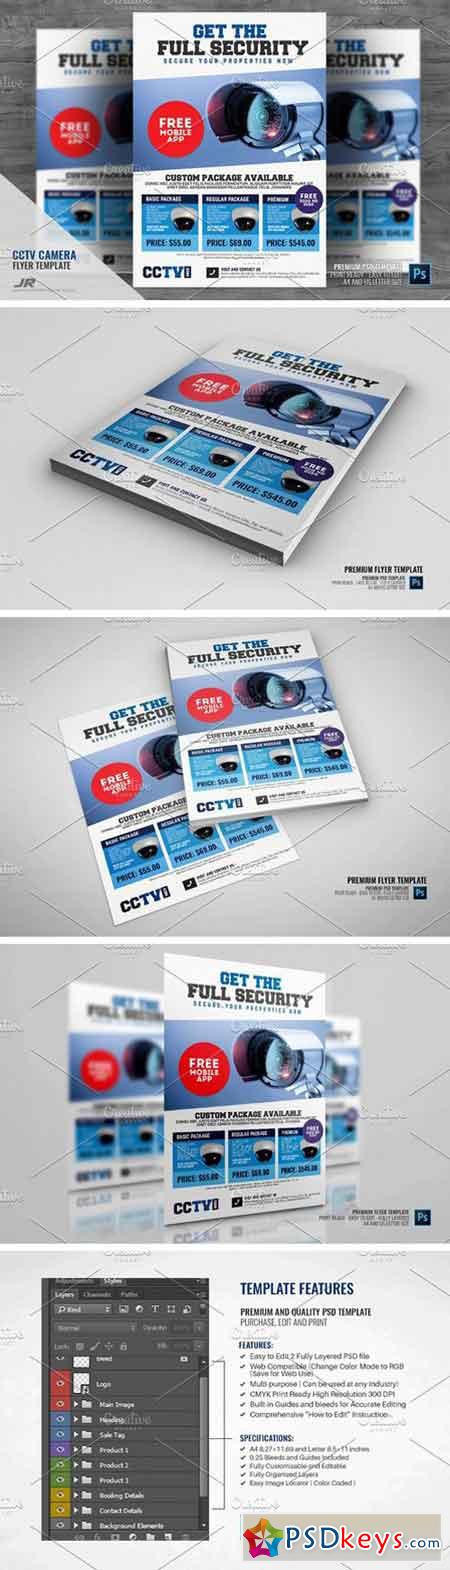 CCTV Package Promotional Flyer 2276567